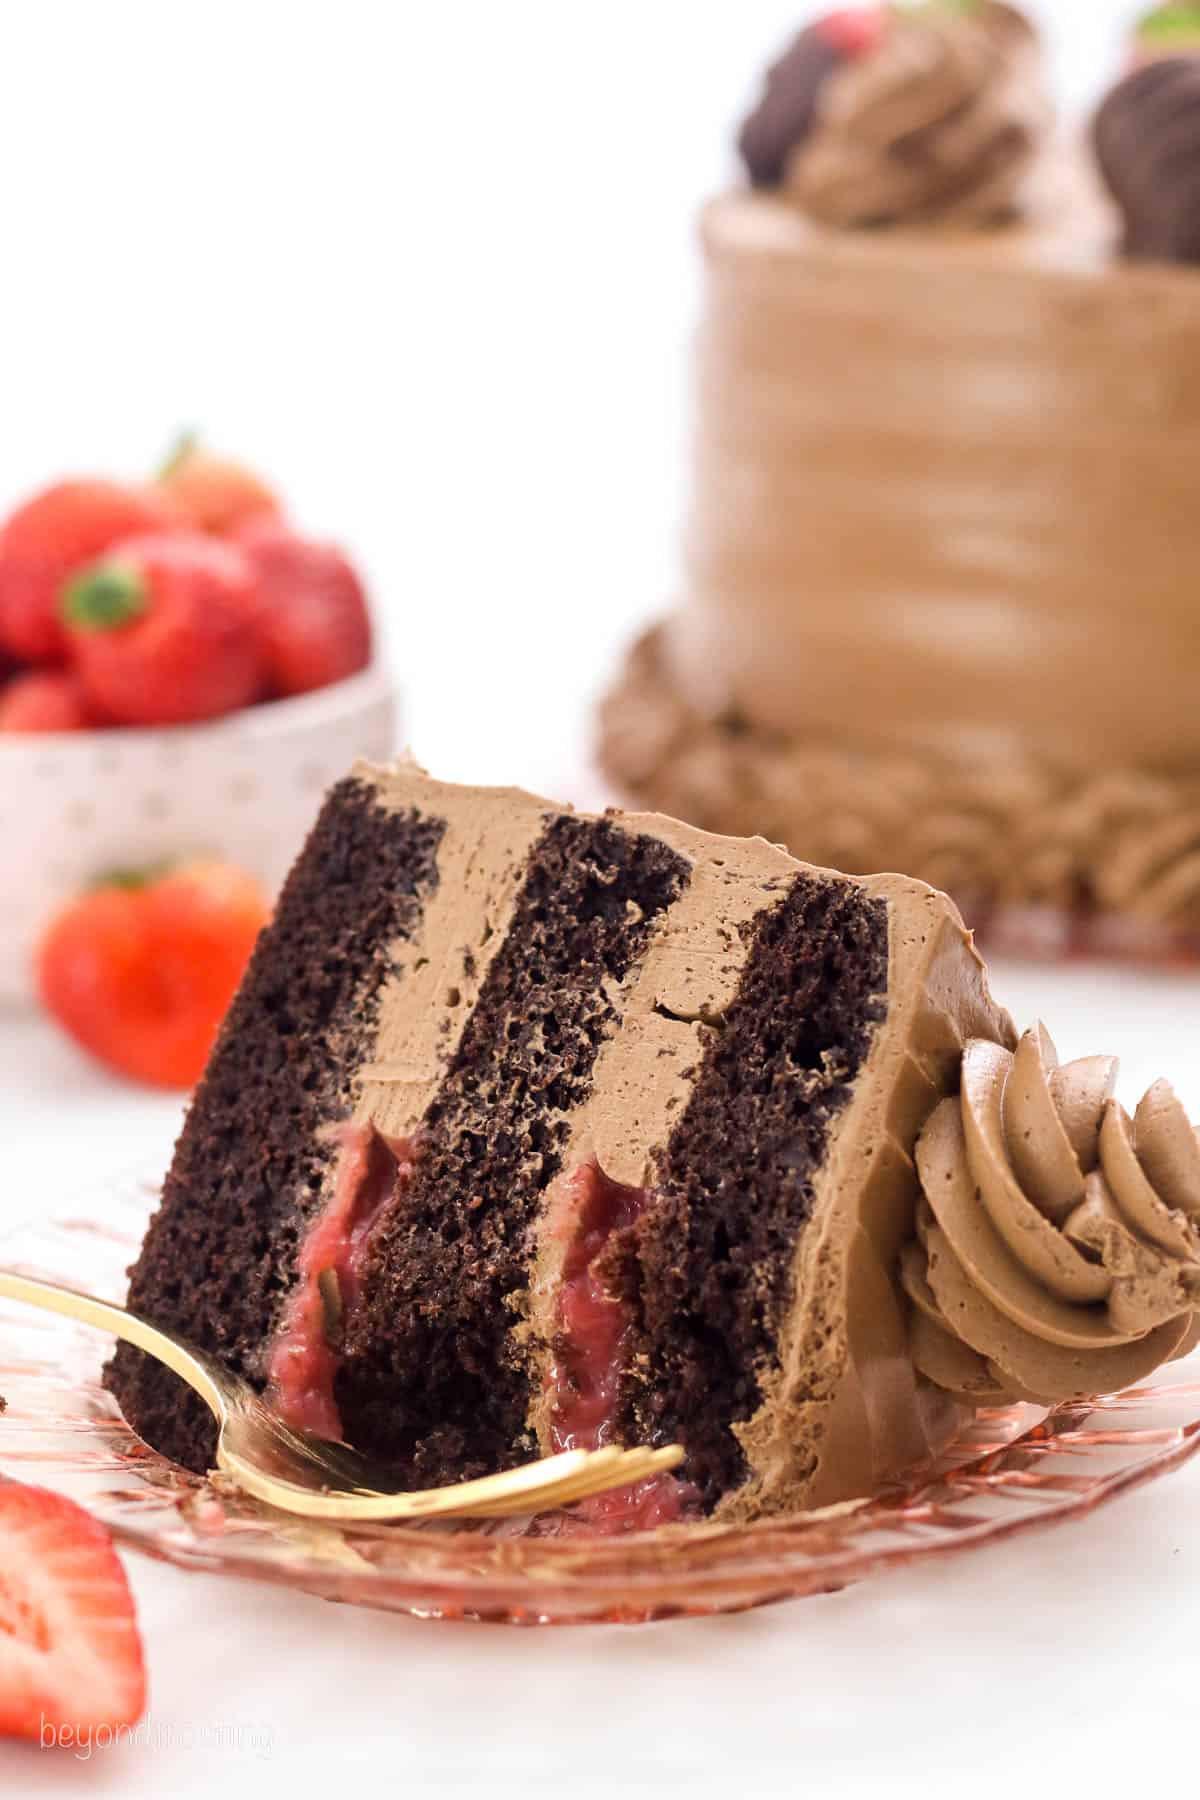 A partially eaten slice of frosted chocolate strawberry layer cake laying on its side on a plate, next to a fork.